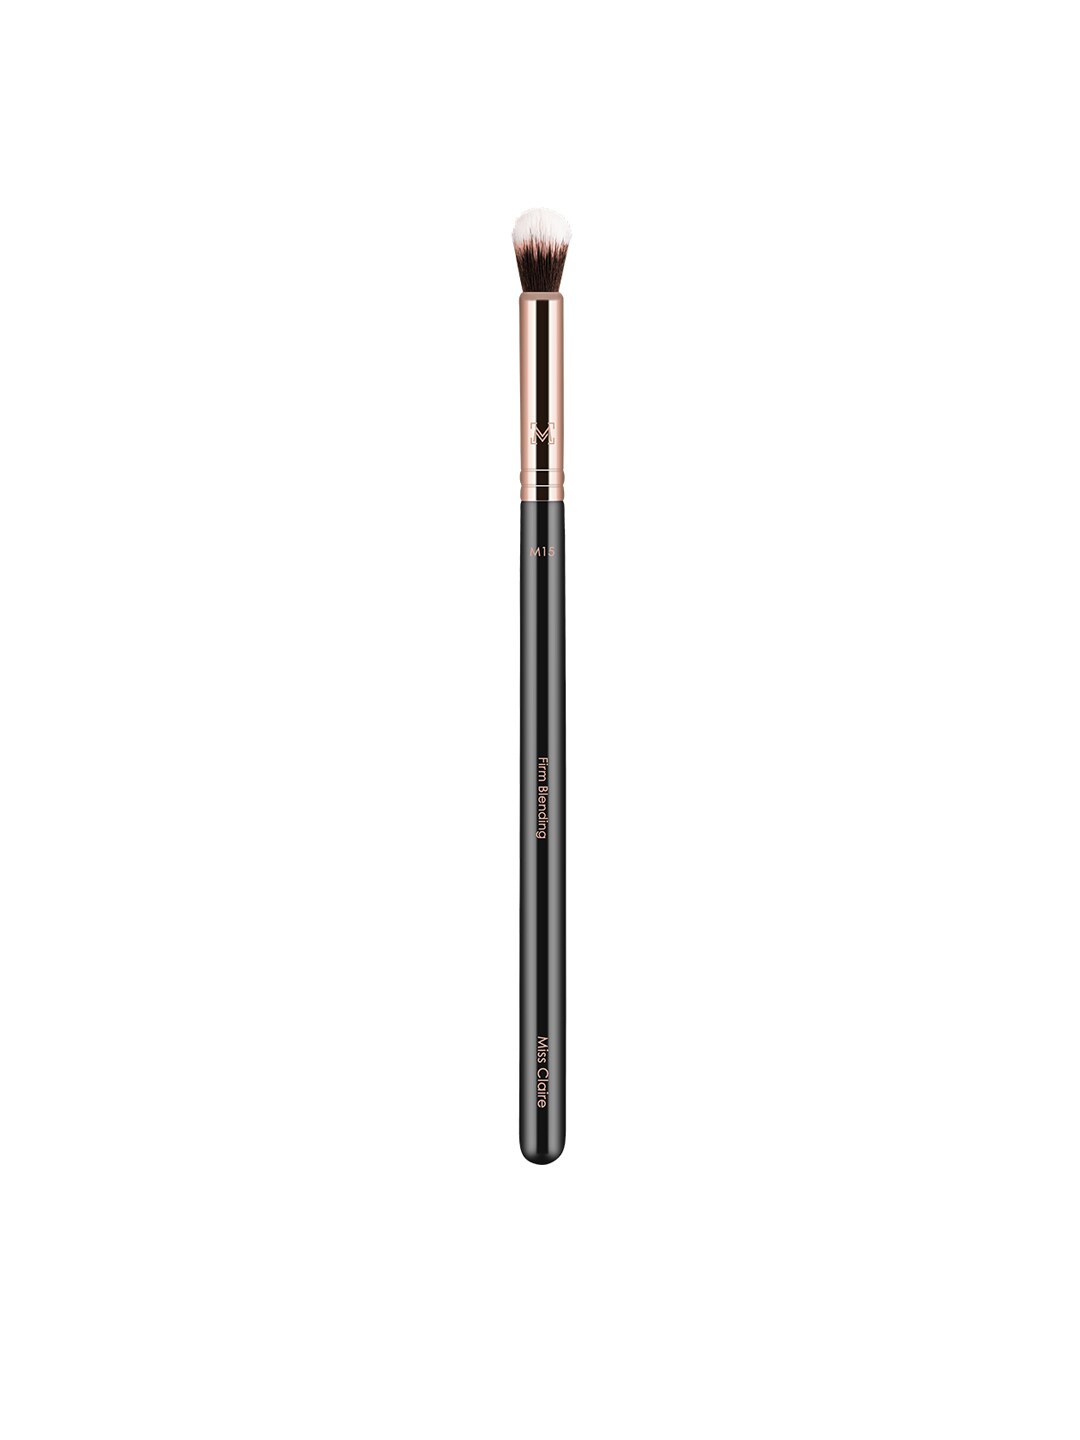 Miss Claire M15 - Firm Blending Eye Brush - Rose Gold-Toned & Black Price in India